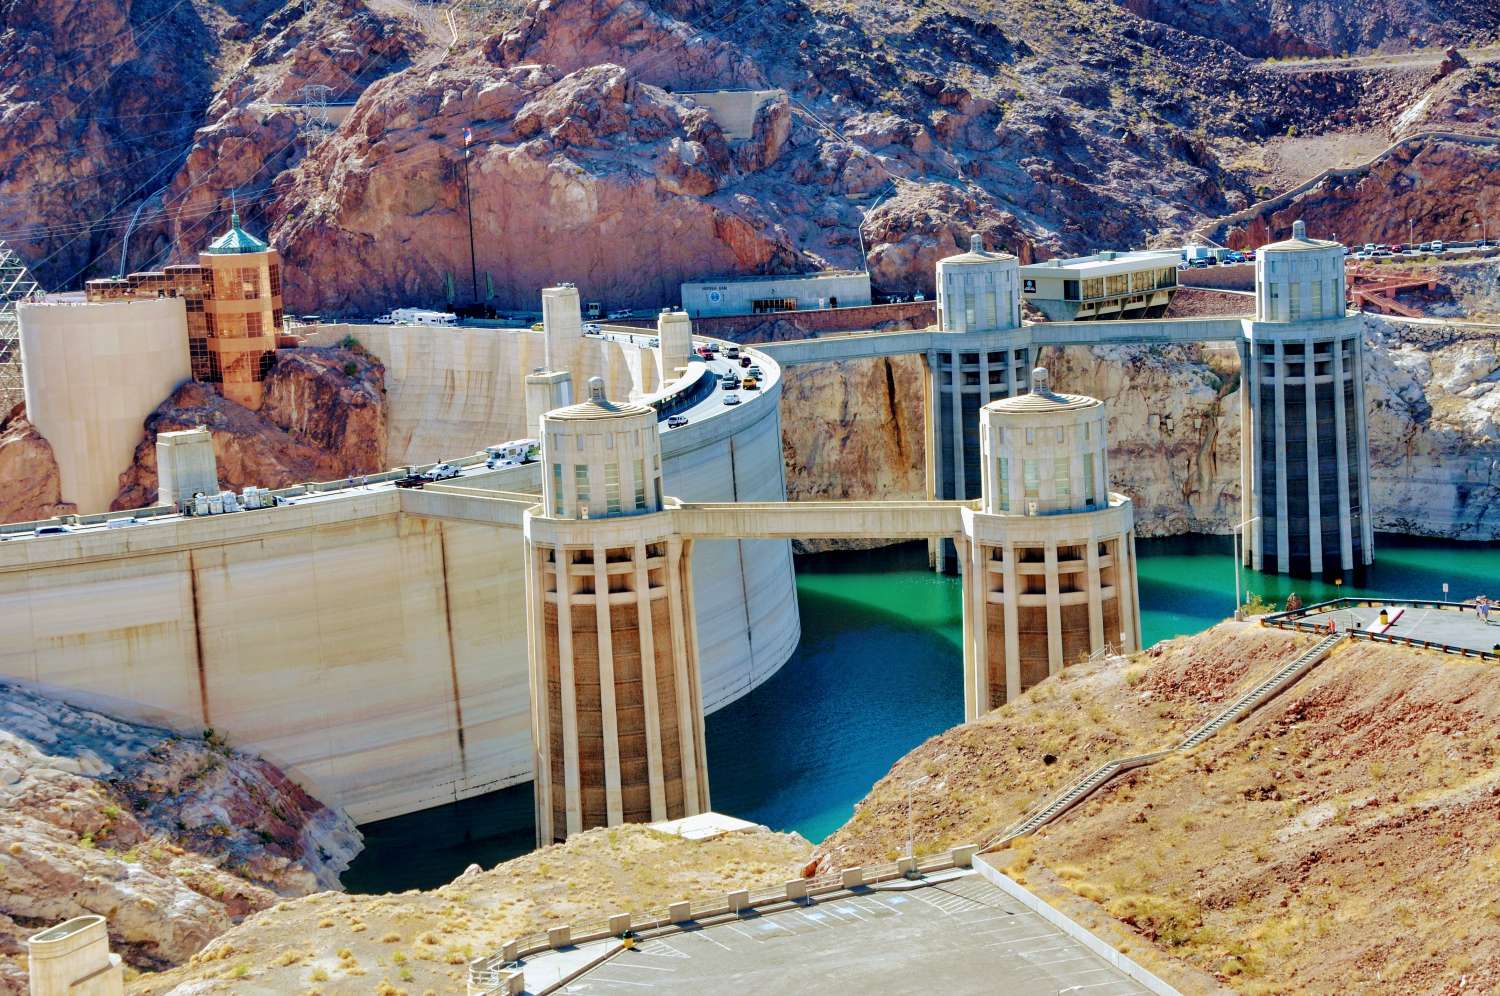 hoover dam day trip from vegas